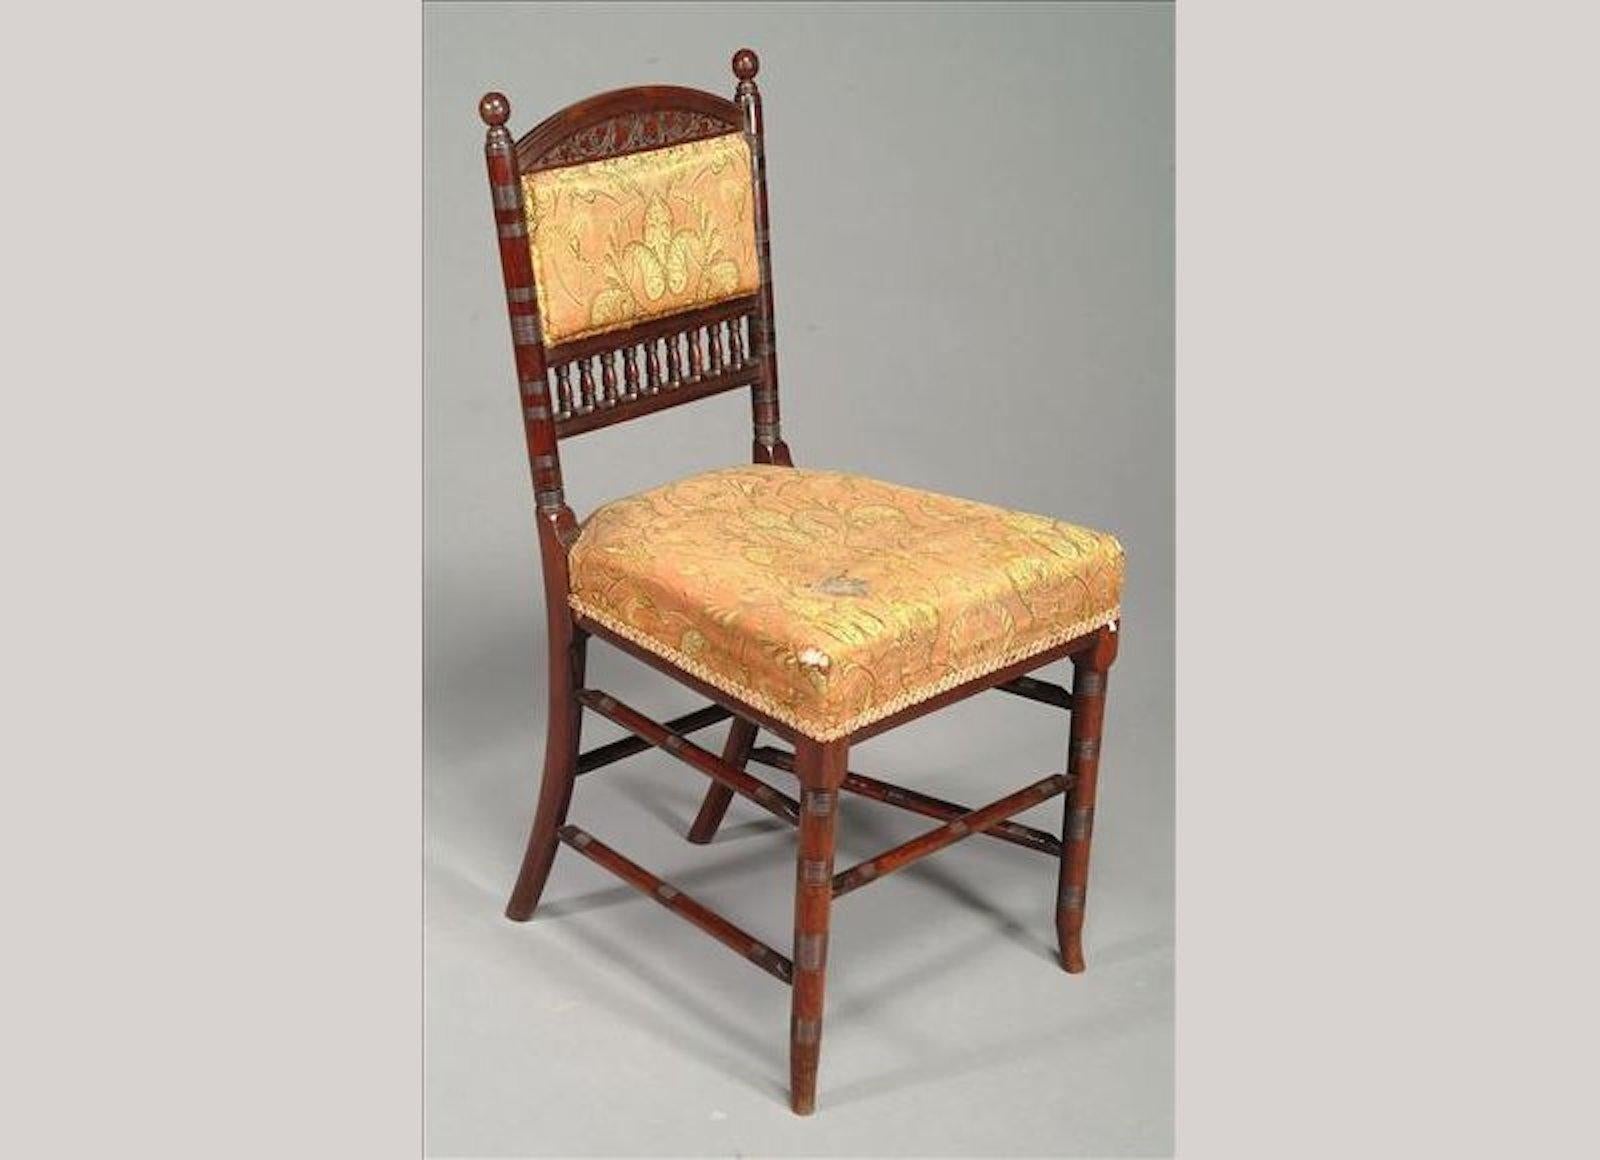 Thomas Edward Collcutt (1840-1924) for Collinson and Lock of London.
A museum quality rosewood part drawing room suite of two nursing and four side chairs. Comprising: four side or dining chairs, a high-back nursing chair and a low-back nursing